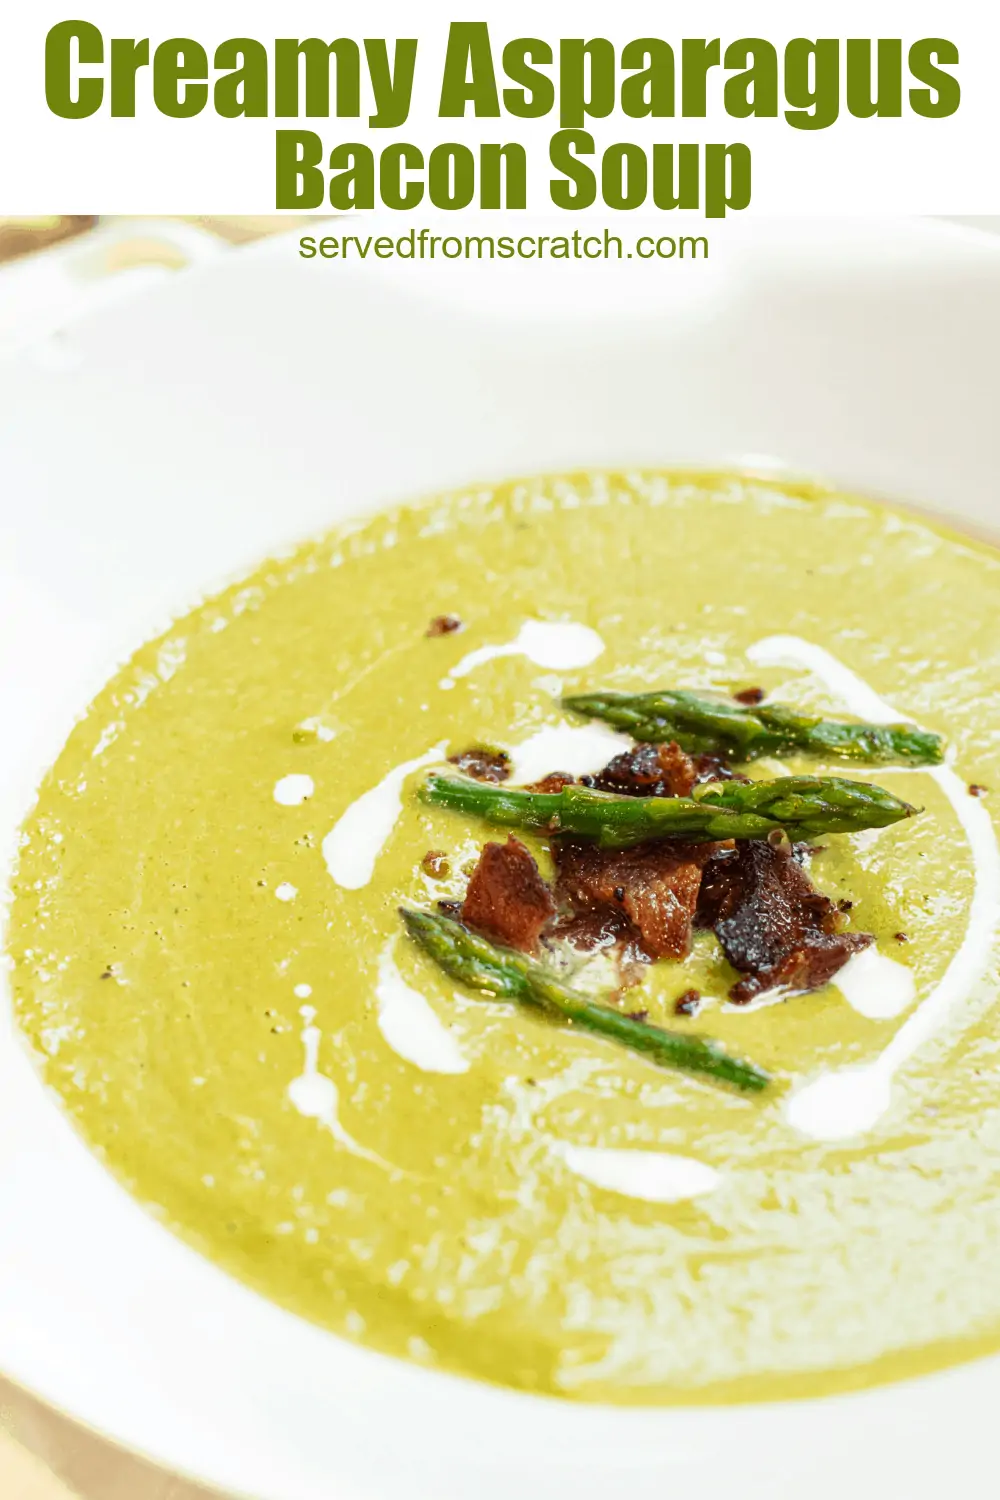 bowl of soup with bacon and asparagus and cream.